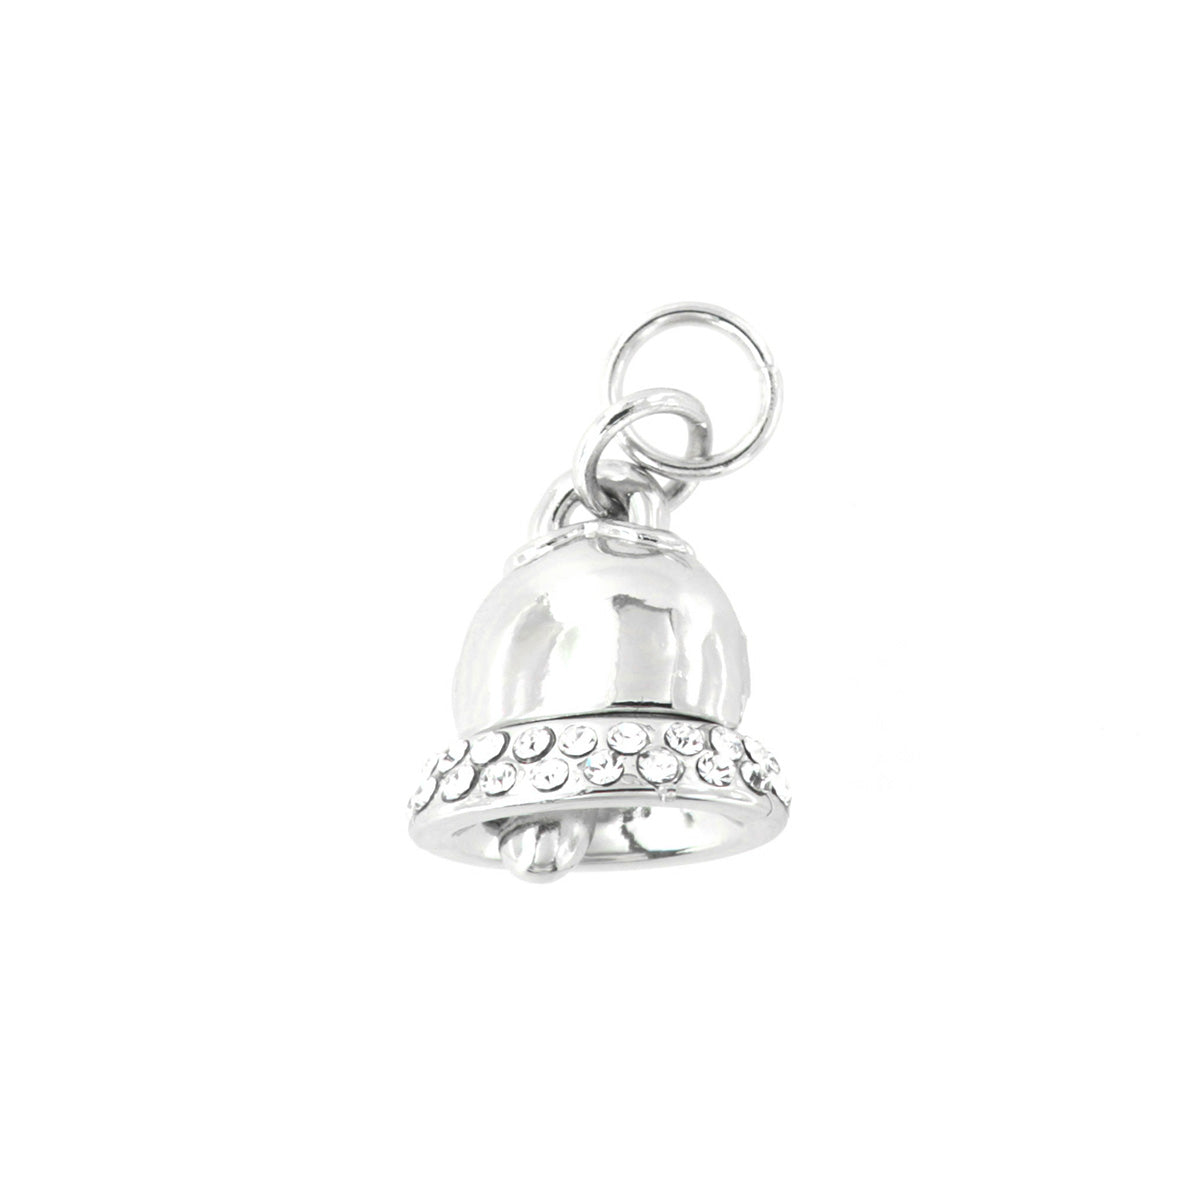 Metal pendant bell tacky bell embellished with white crystals